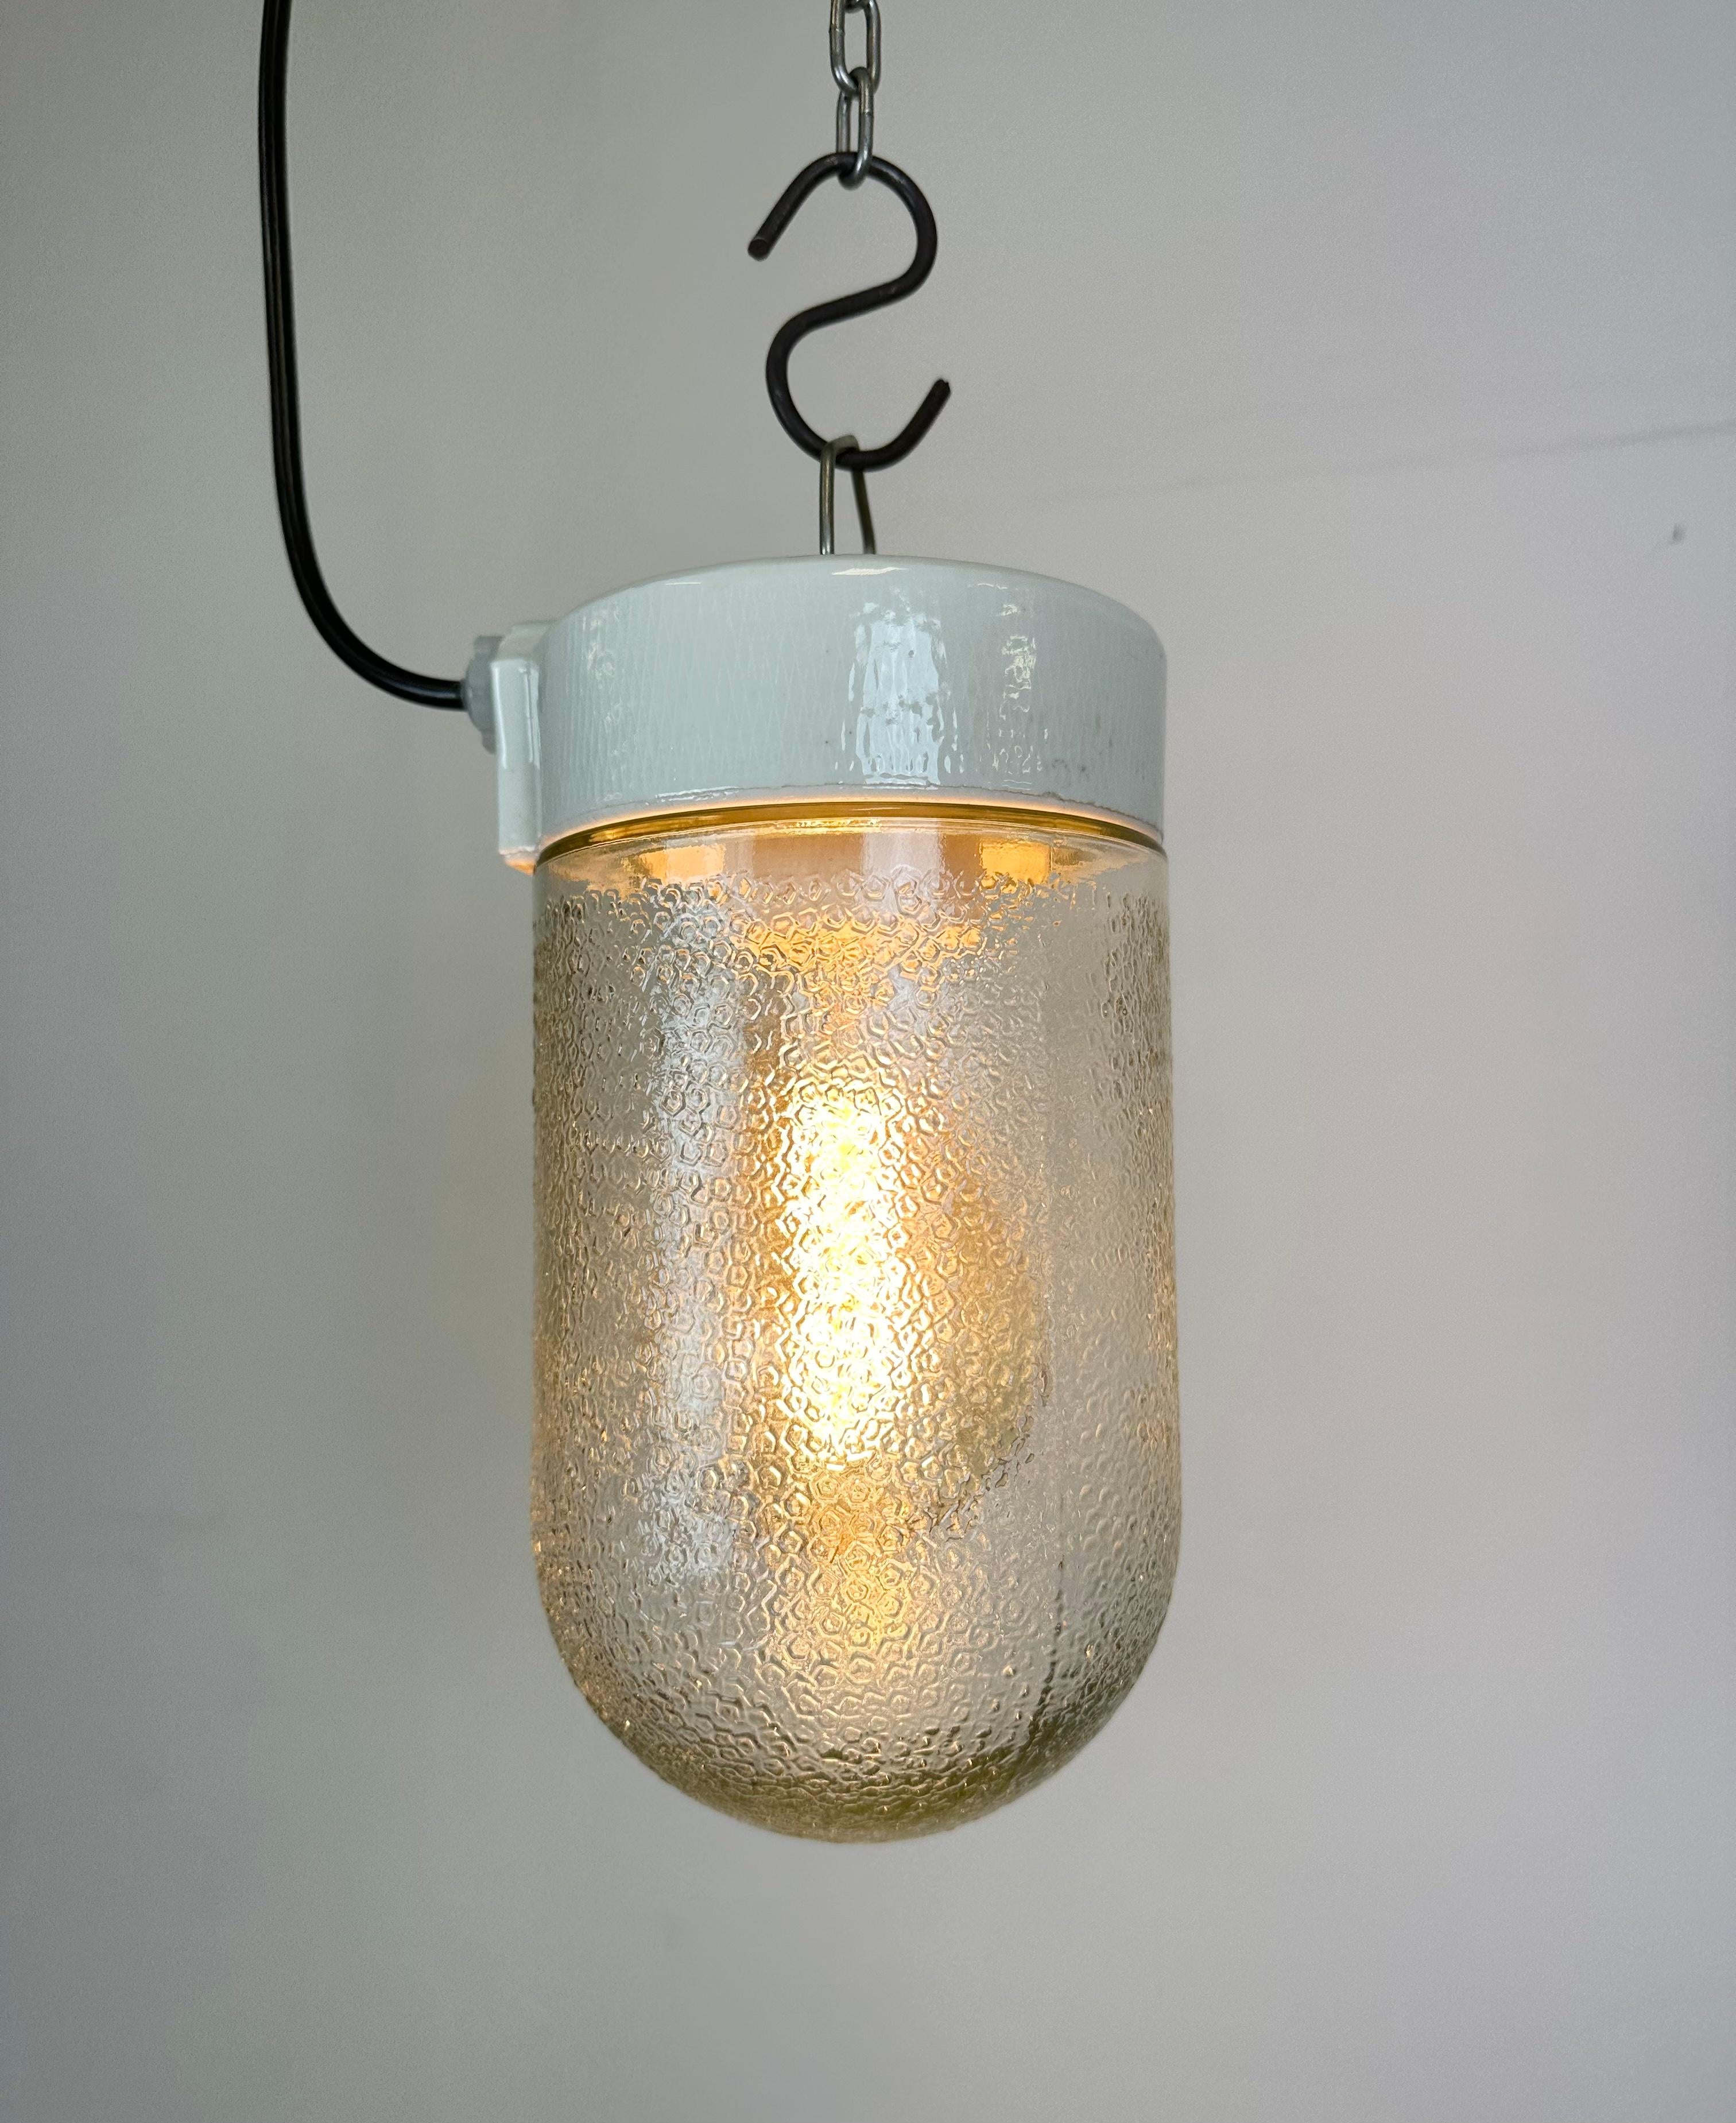 Vintage White Porcelain Pendant Light with Frosted Glass, 1970s For Sale 3